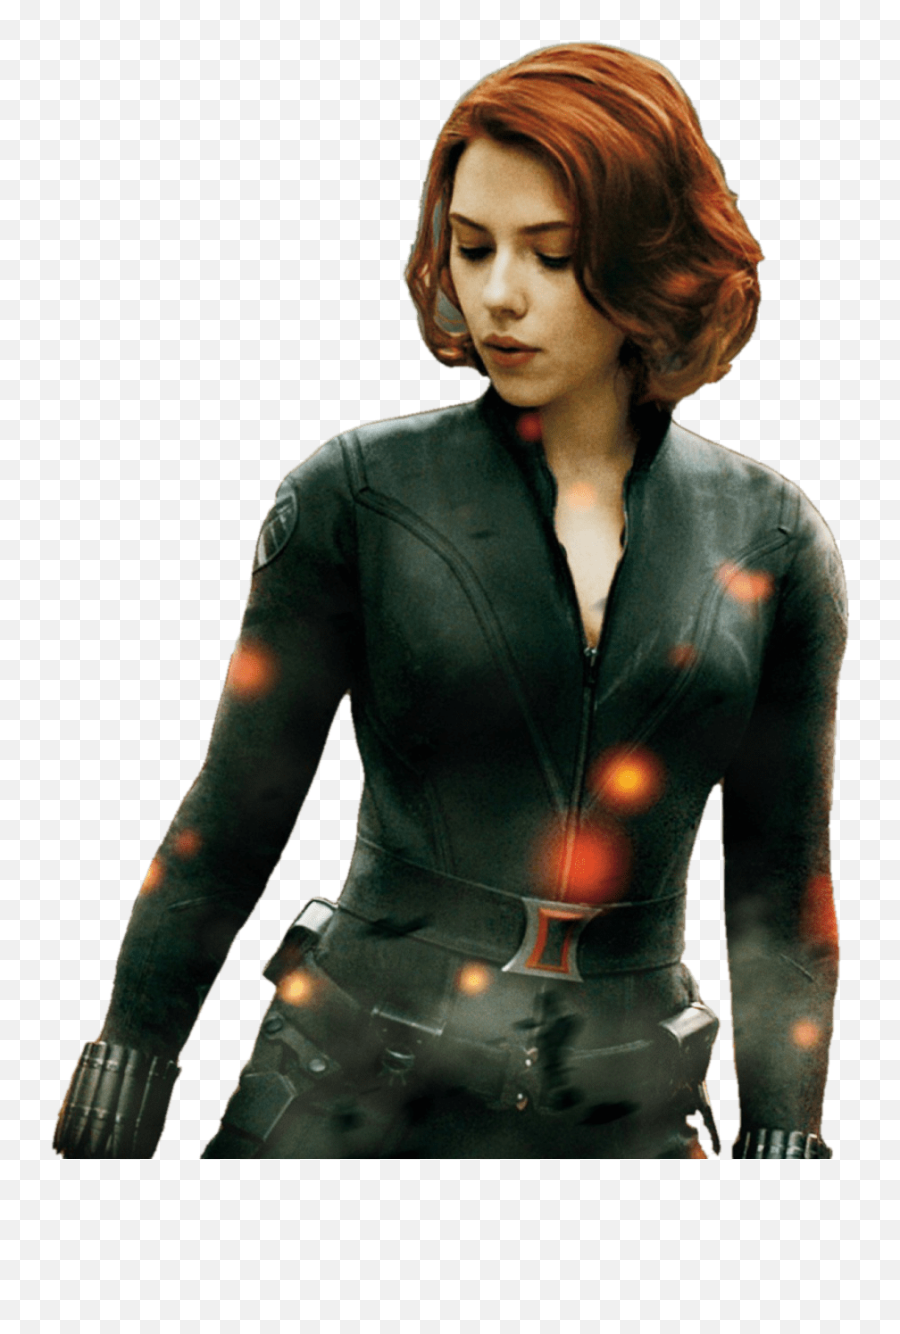 Avengers Girl Png Images - Pngmafia,The Avengers Png